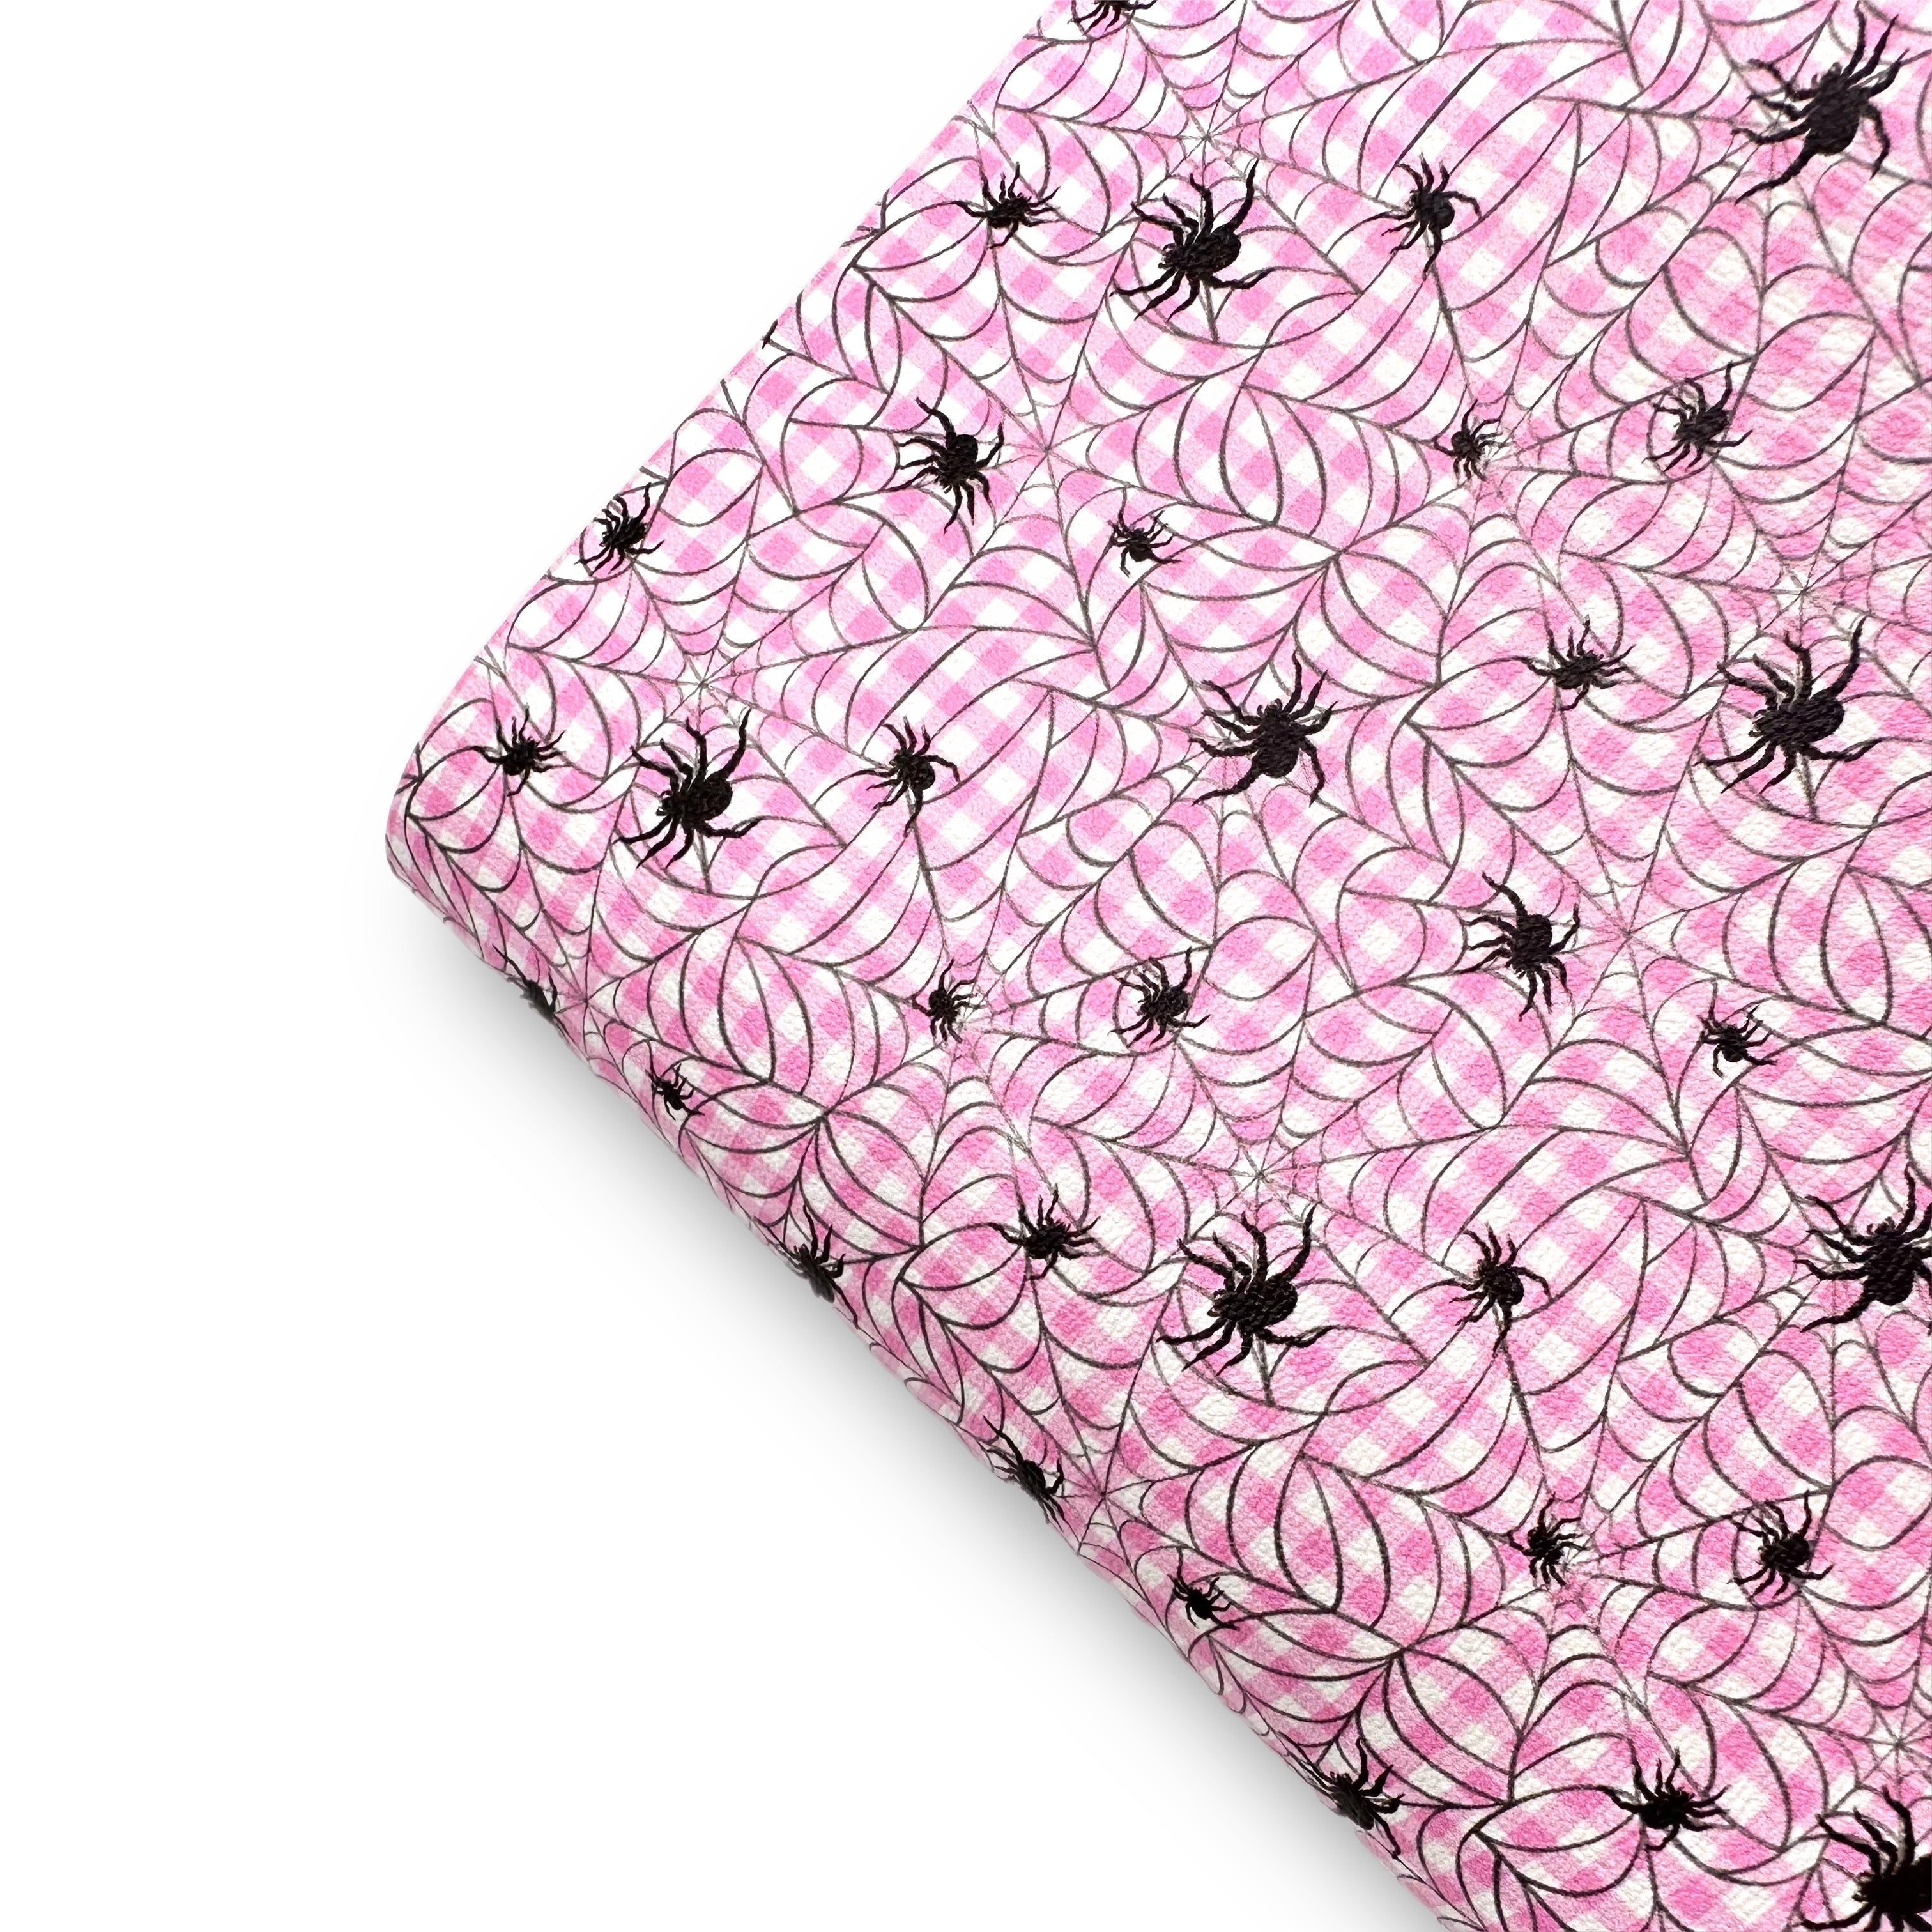 Girly Gingham Spider Webs Premium Faux Leather Fabric Sheets